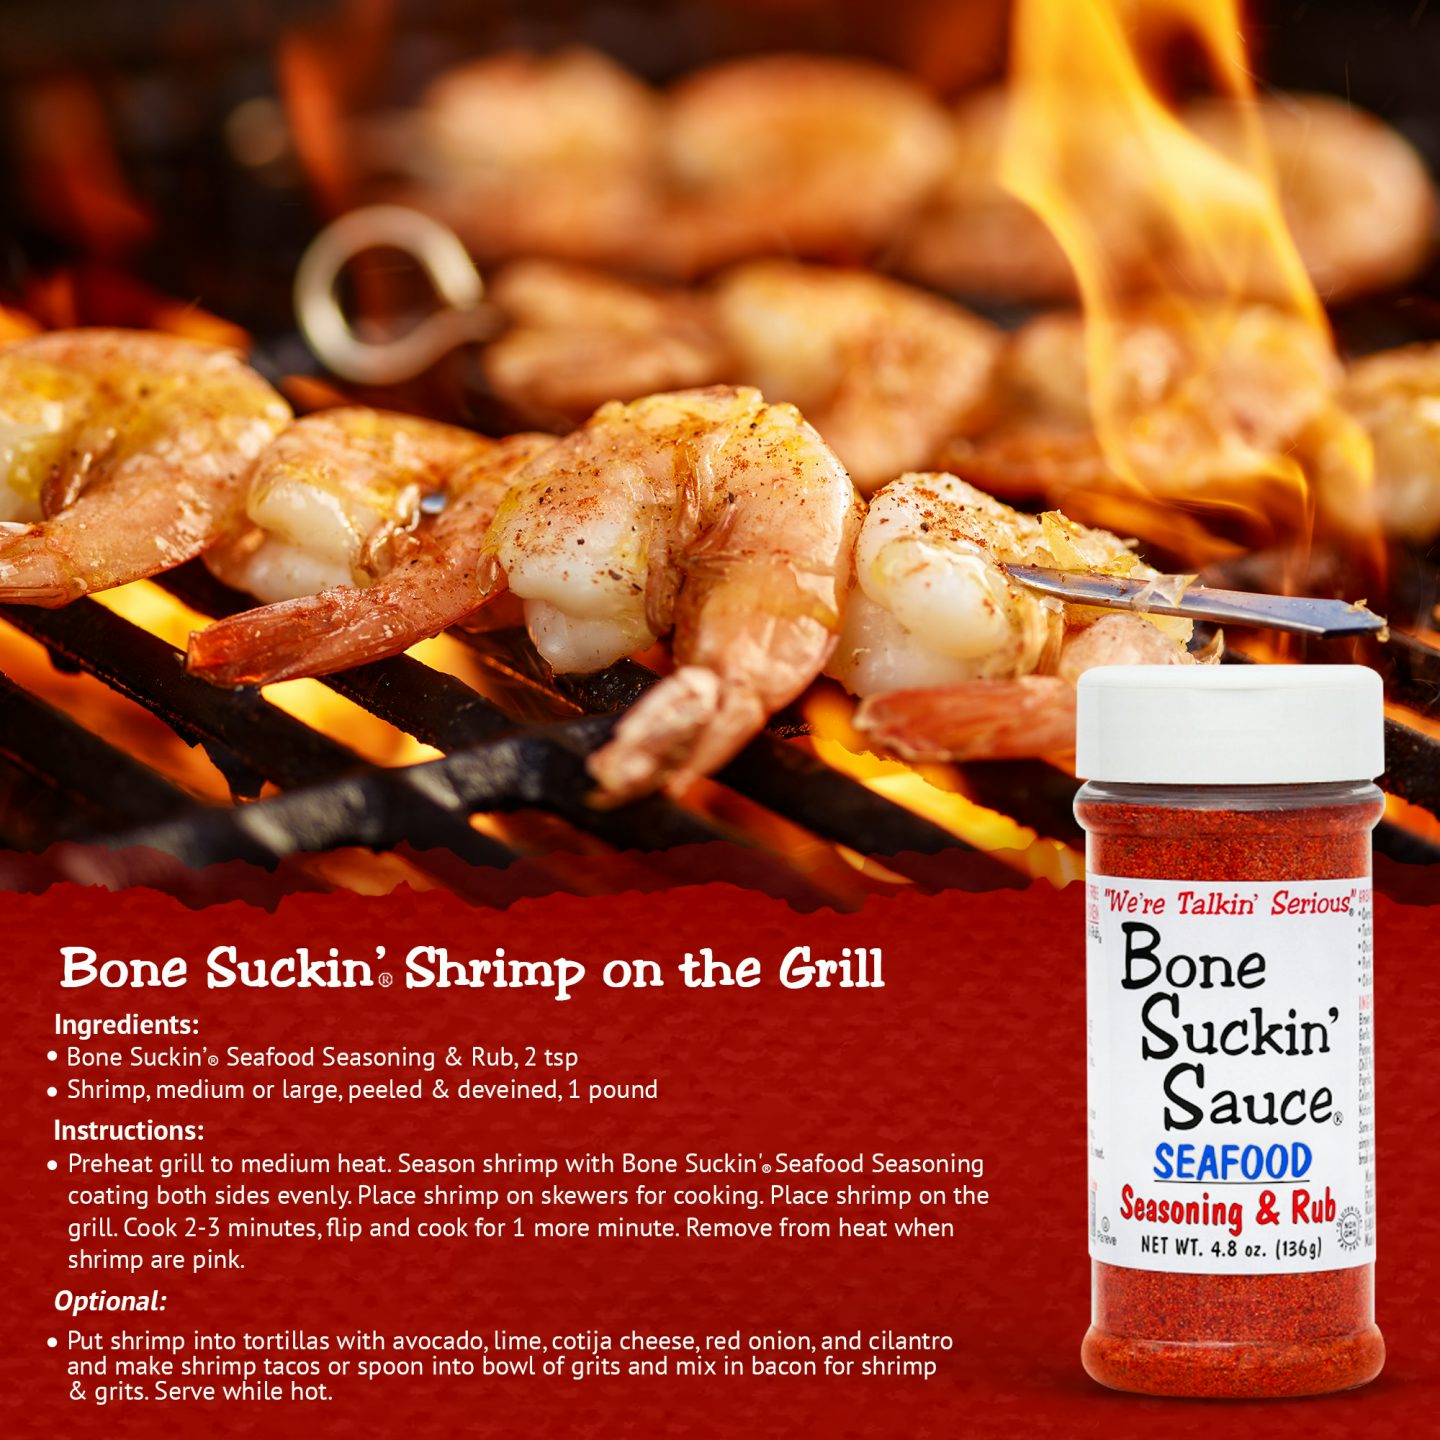 Bone Suckin' Shrimp on the Grill Recipe. Ingredients: Bone Suckin' Seafood Seasoning & Rub, 2 tsp, Shrimp, medium or large, peeled and deveined, 1 pound. Instructions: Preheat grill to medium heat. Season shrimp coating both sides evenly. Place shrimp on skewers for cooking. Place shrimp on grill. Cook 2-3 minutes, flip and cook for 1 more minute. Remove from heat when shrimp are pink. 